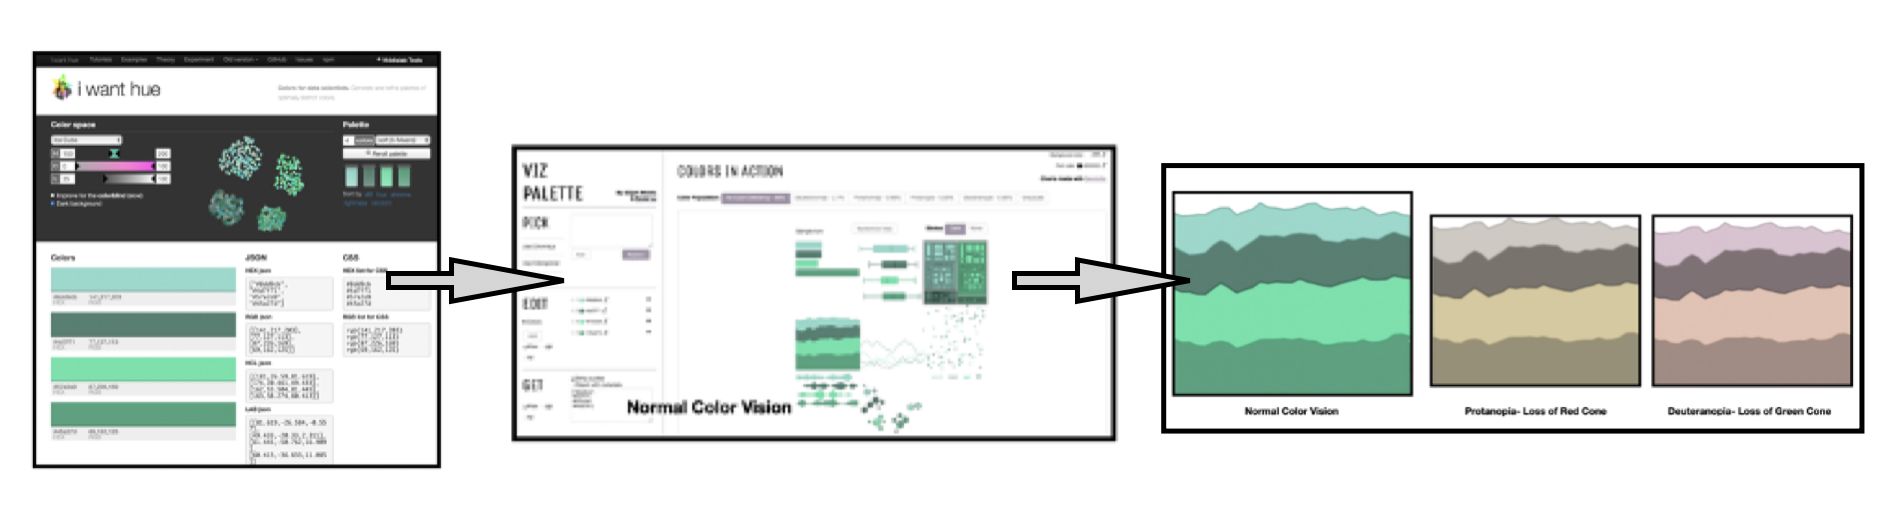 Creating a Viva Magenta sequence for data visualization, by Theresa-Marie  Rhyne